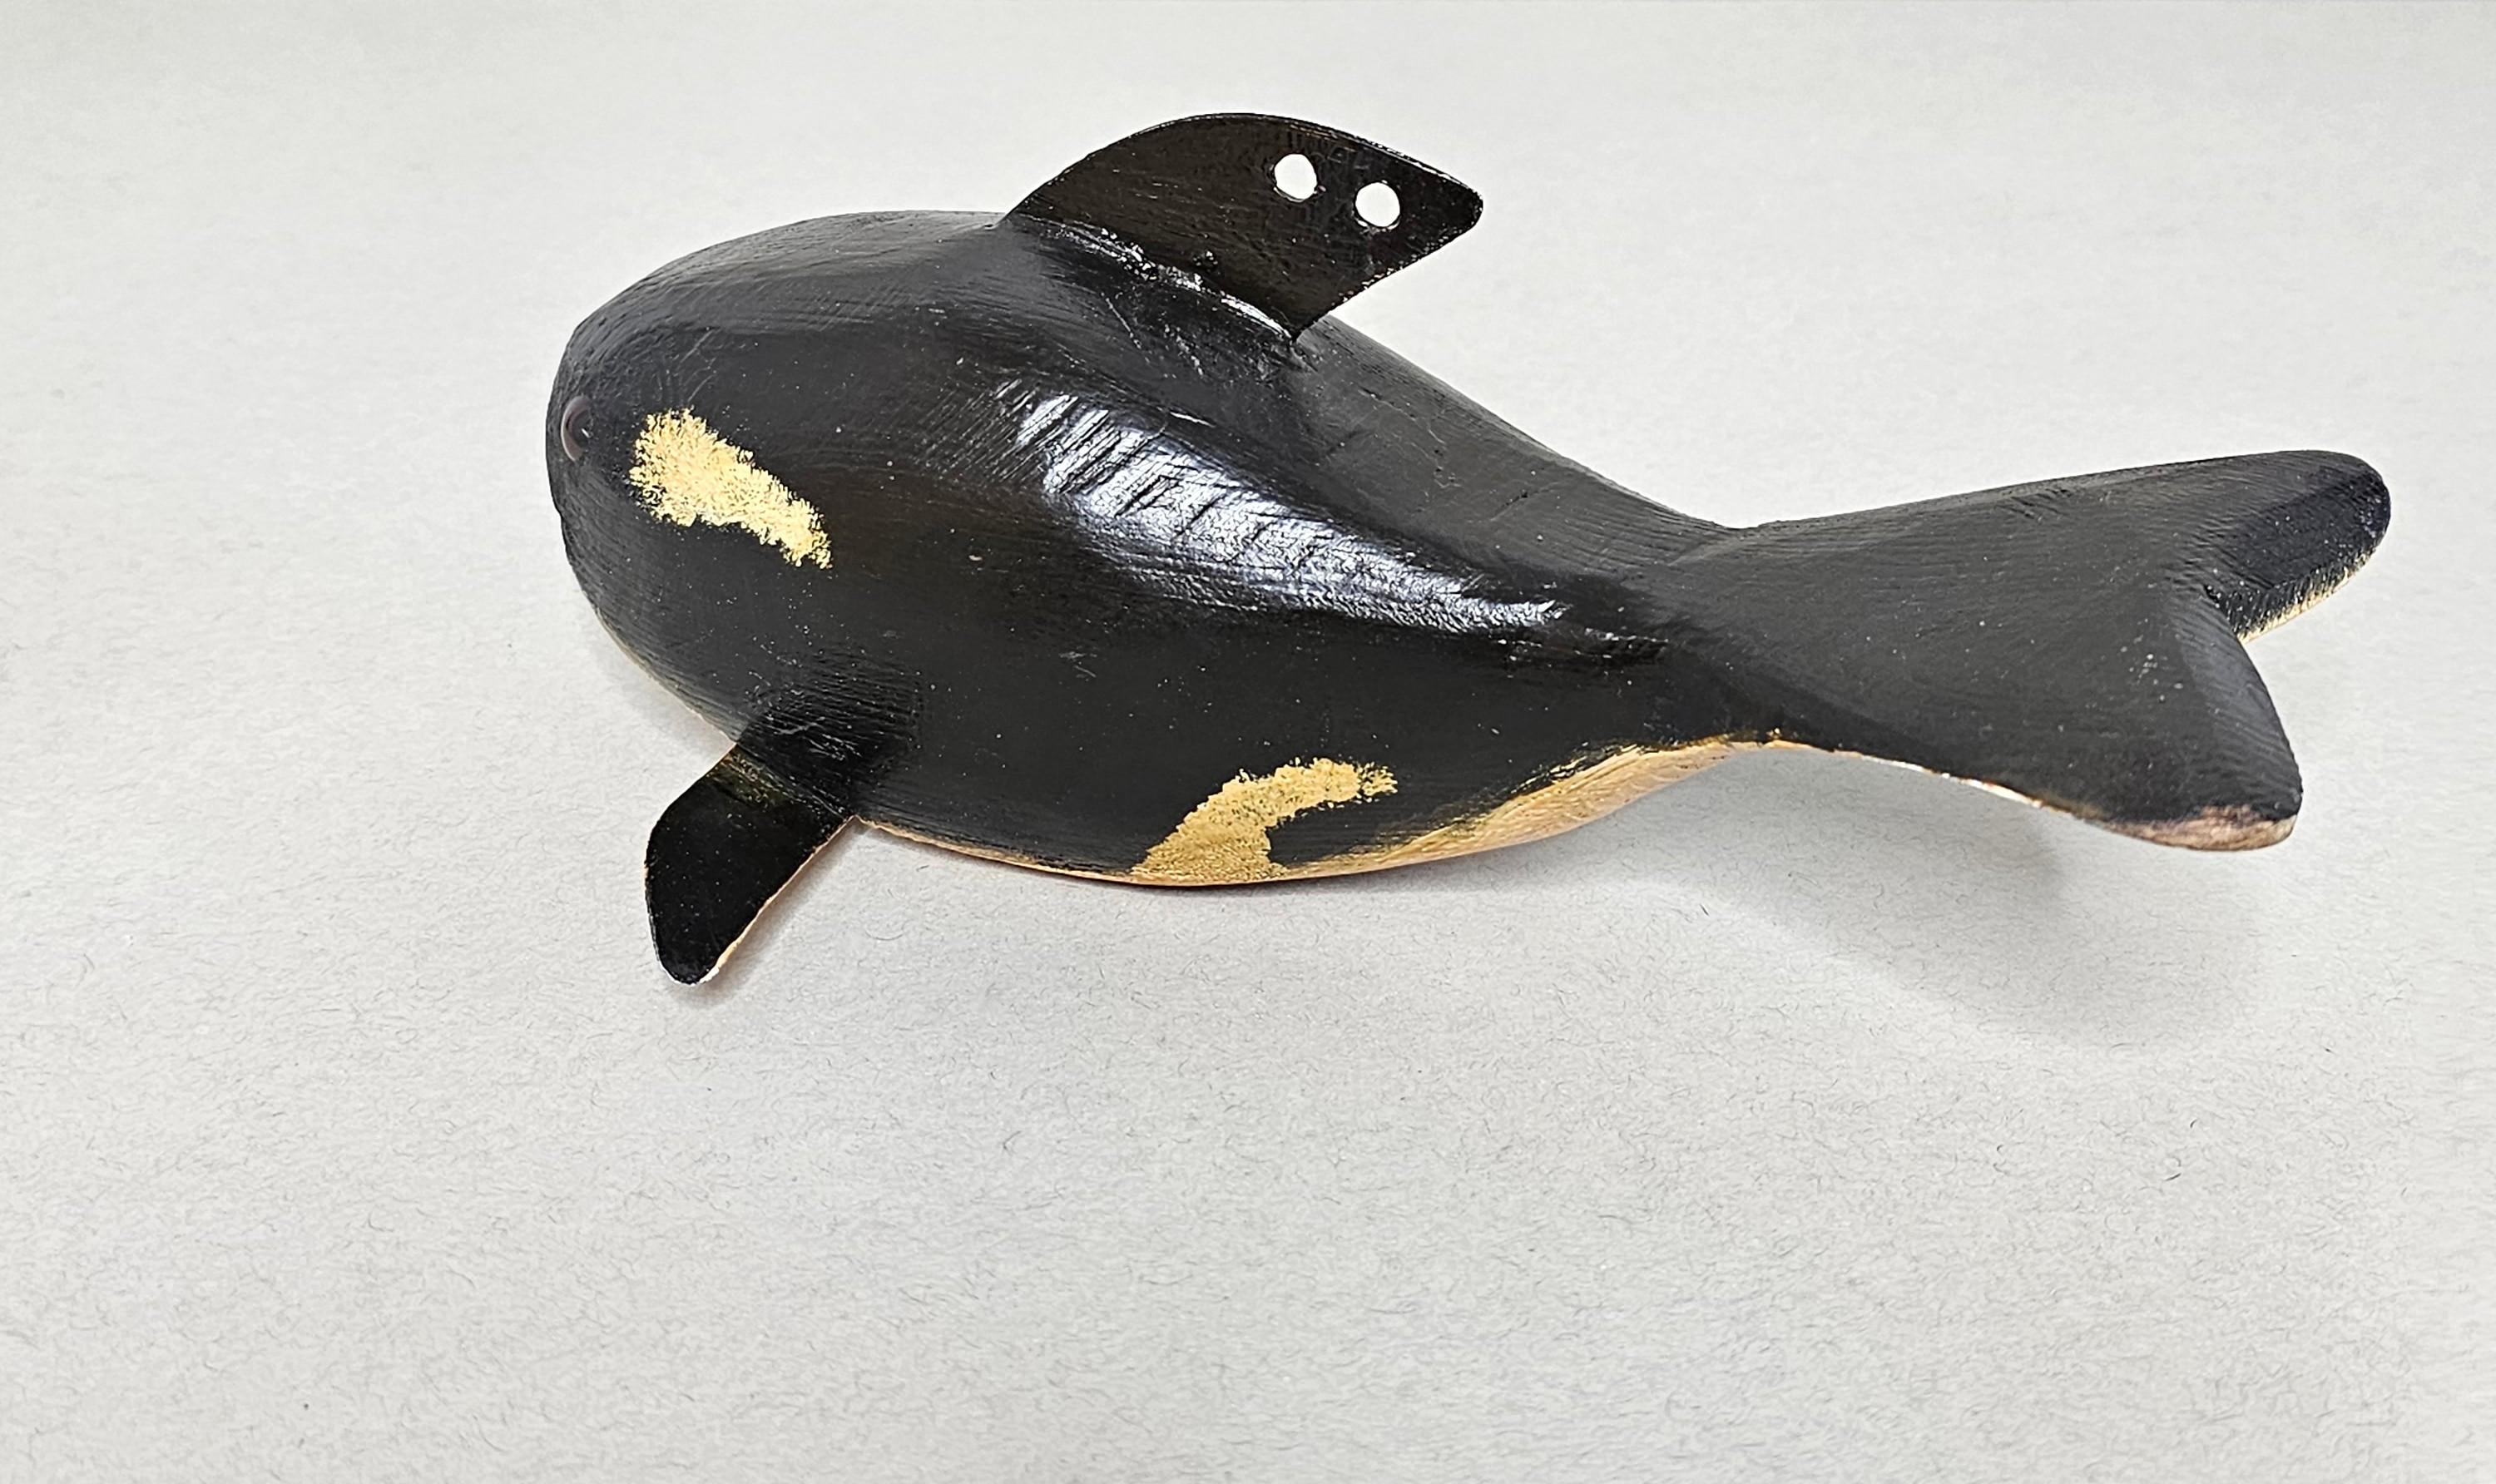 Duluth Fish Decoy American Folk Art Carved Painted Orca Killer Whale Sculpture For Sale 5